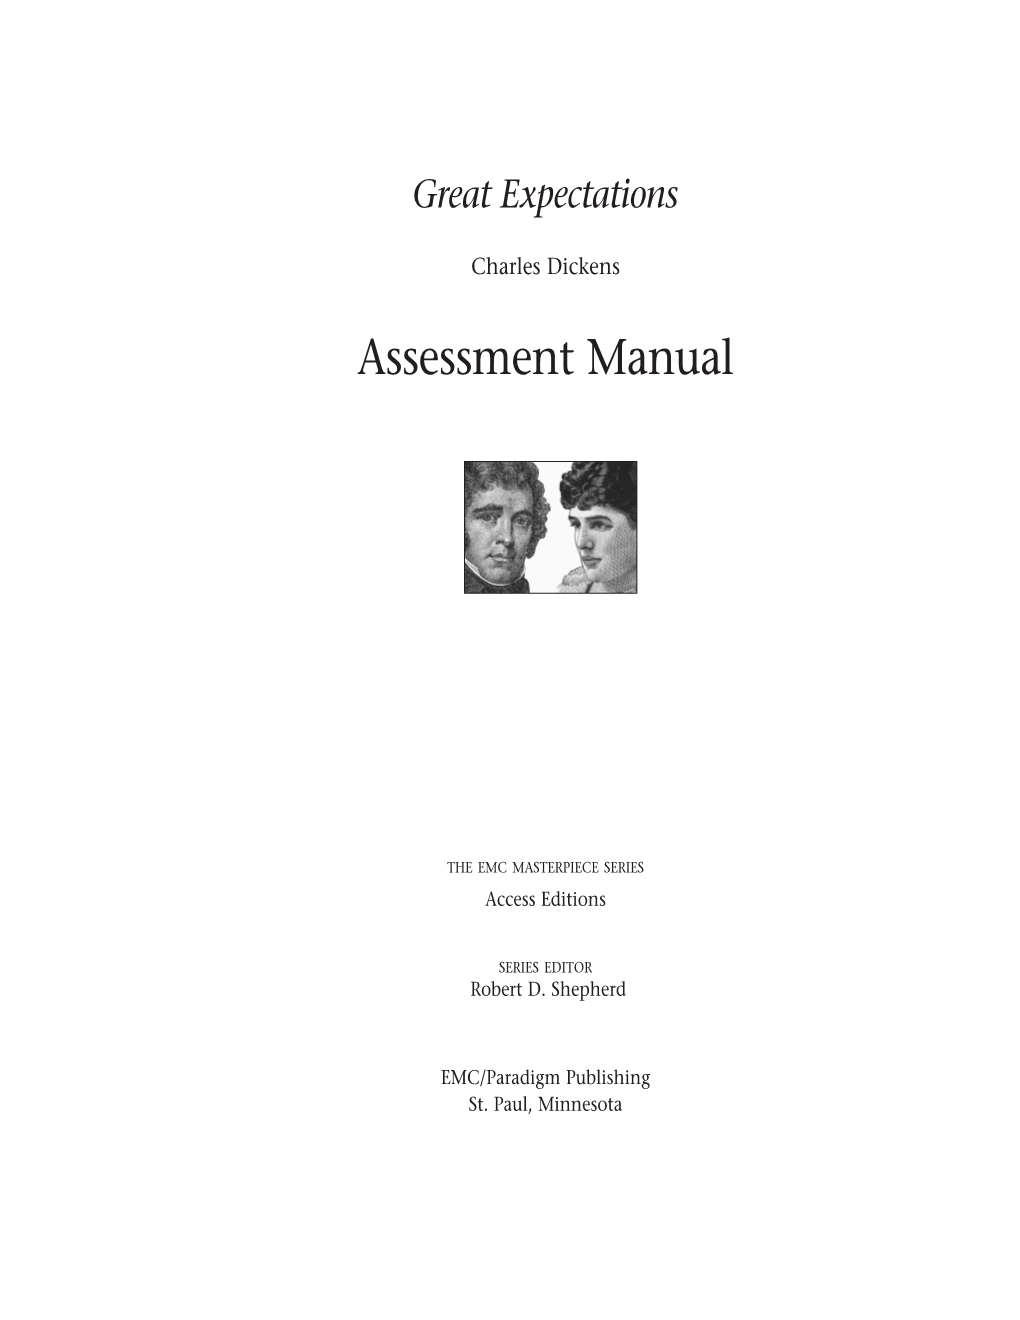 Great Expectations Manual